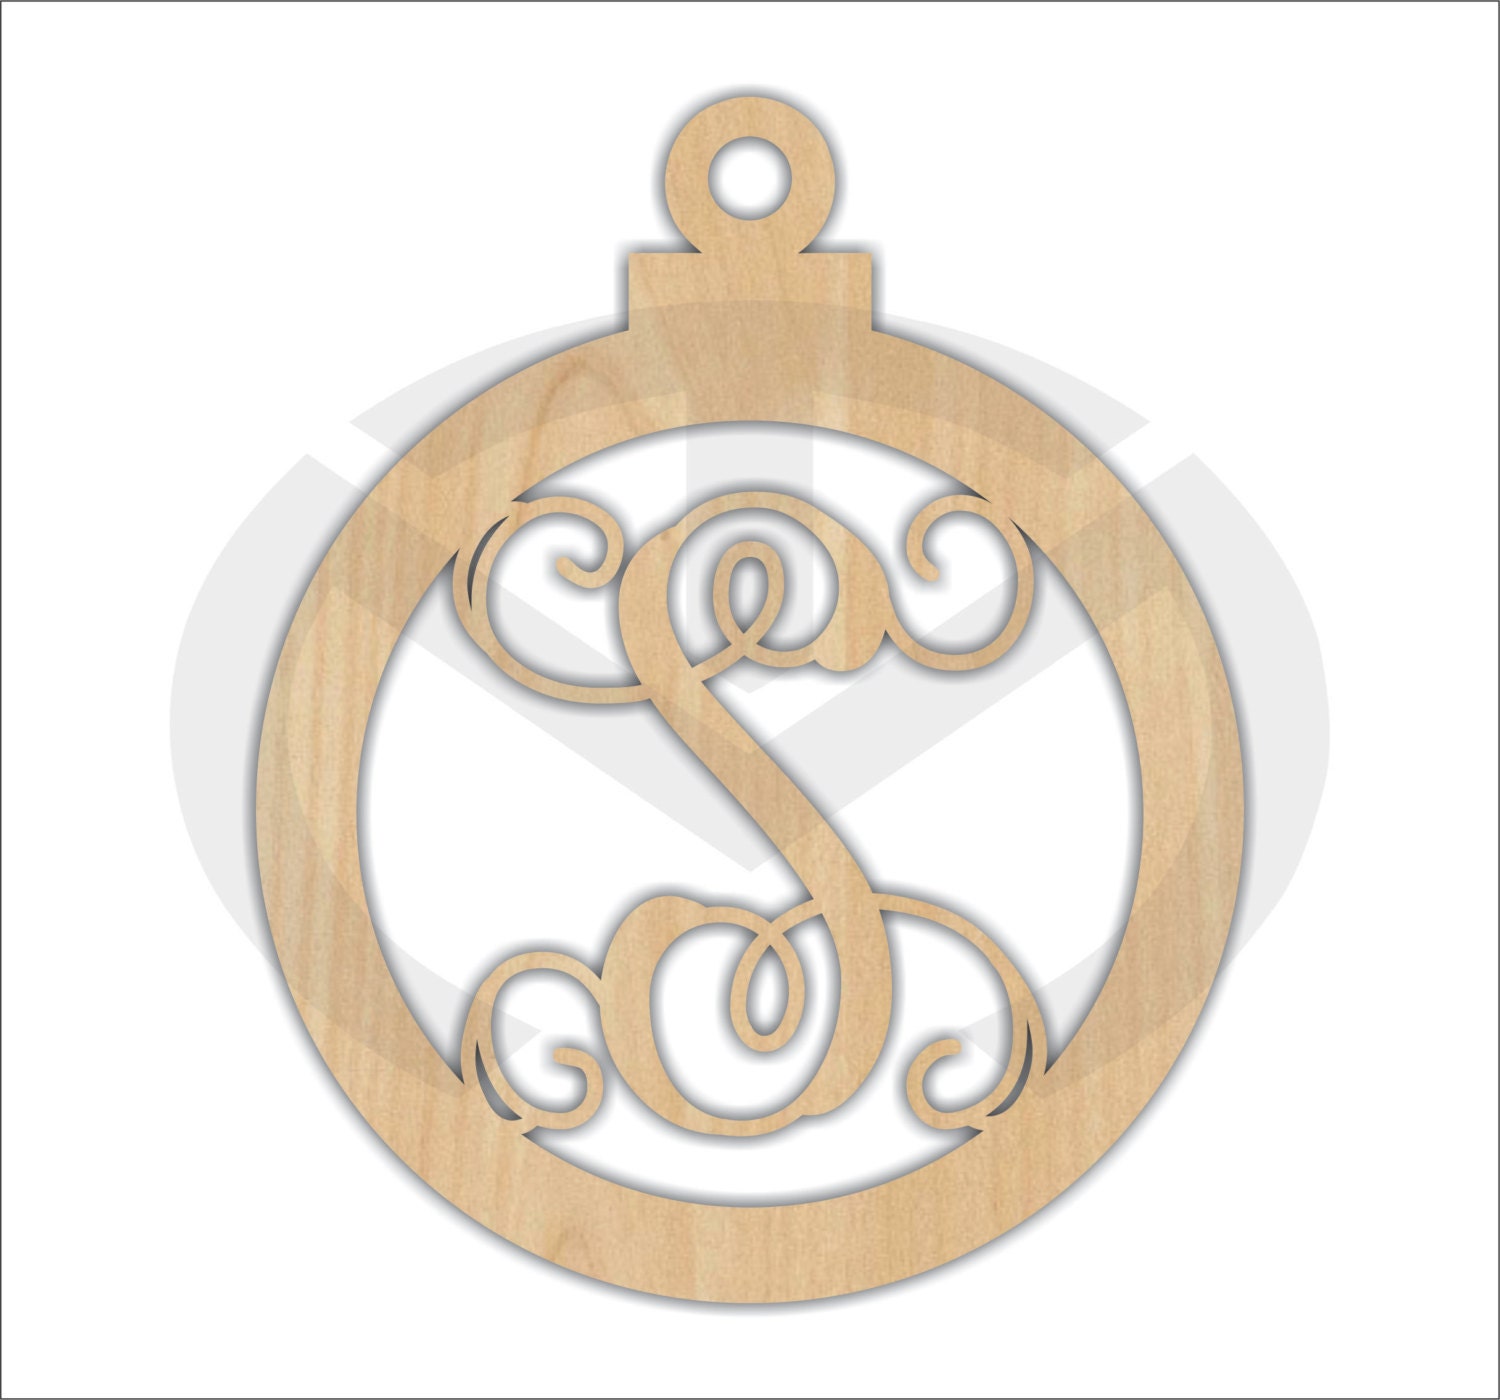 Unfinished Wood State Shape Monogram Door Hanger Laser Cutout with Your Initial